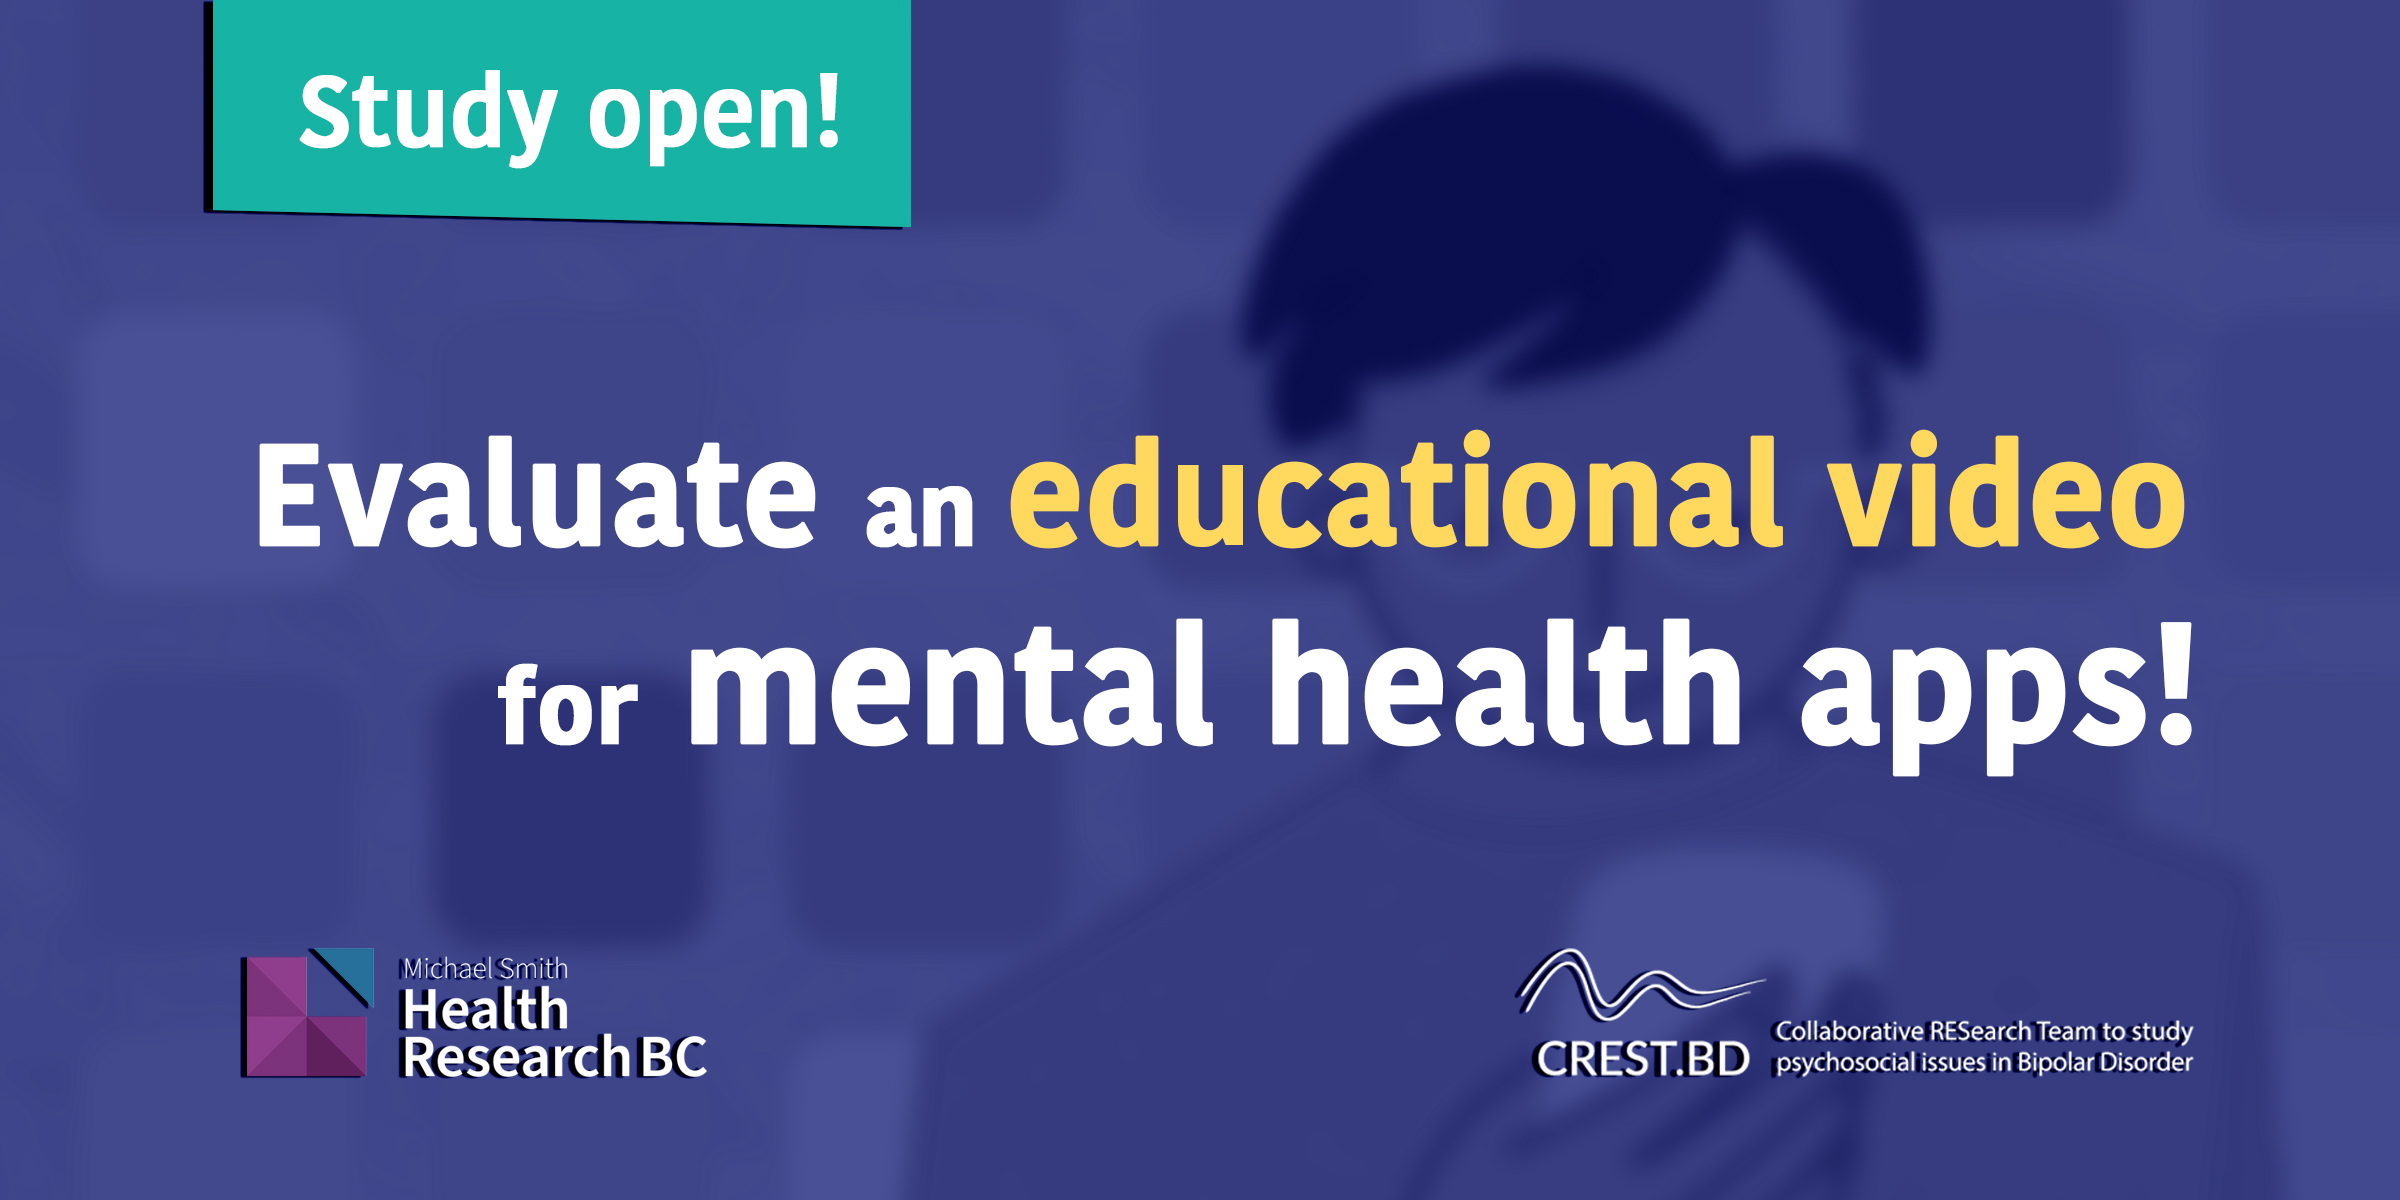 Help us evaluate a new educational video on mental health apps!